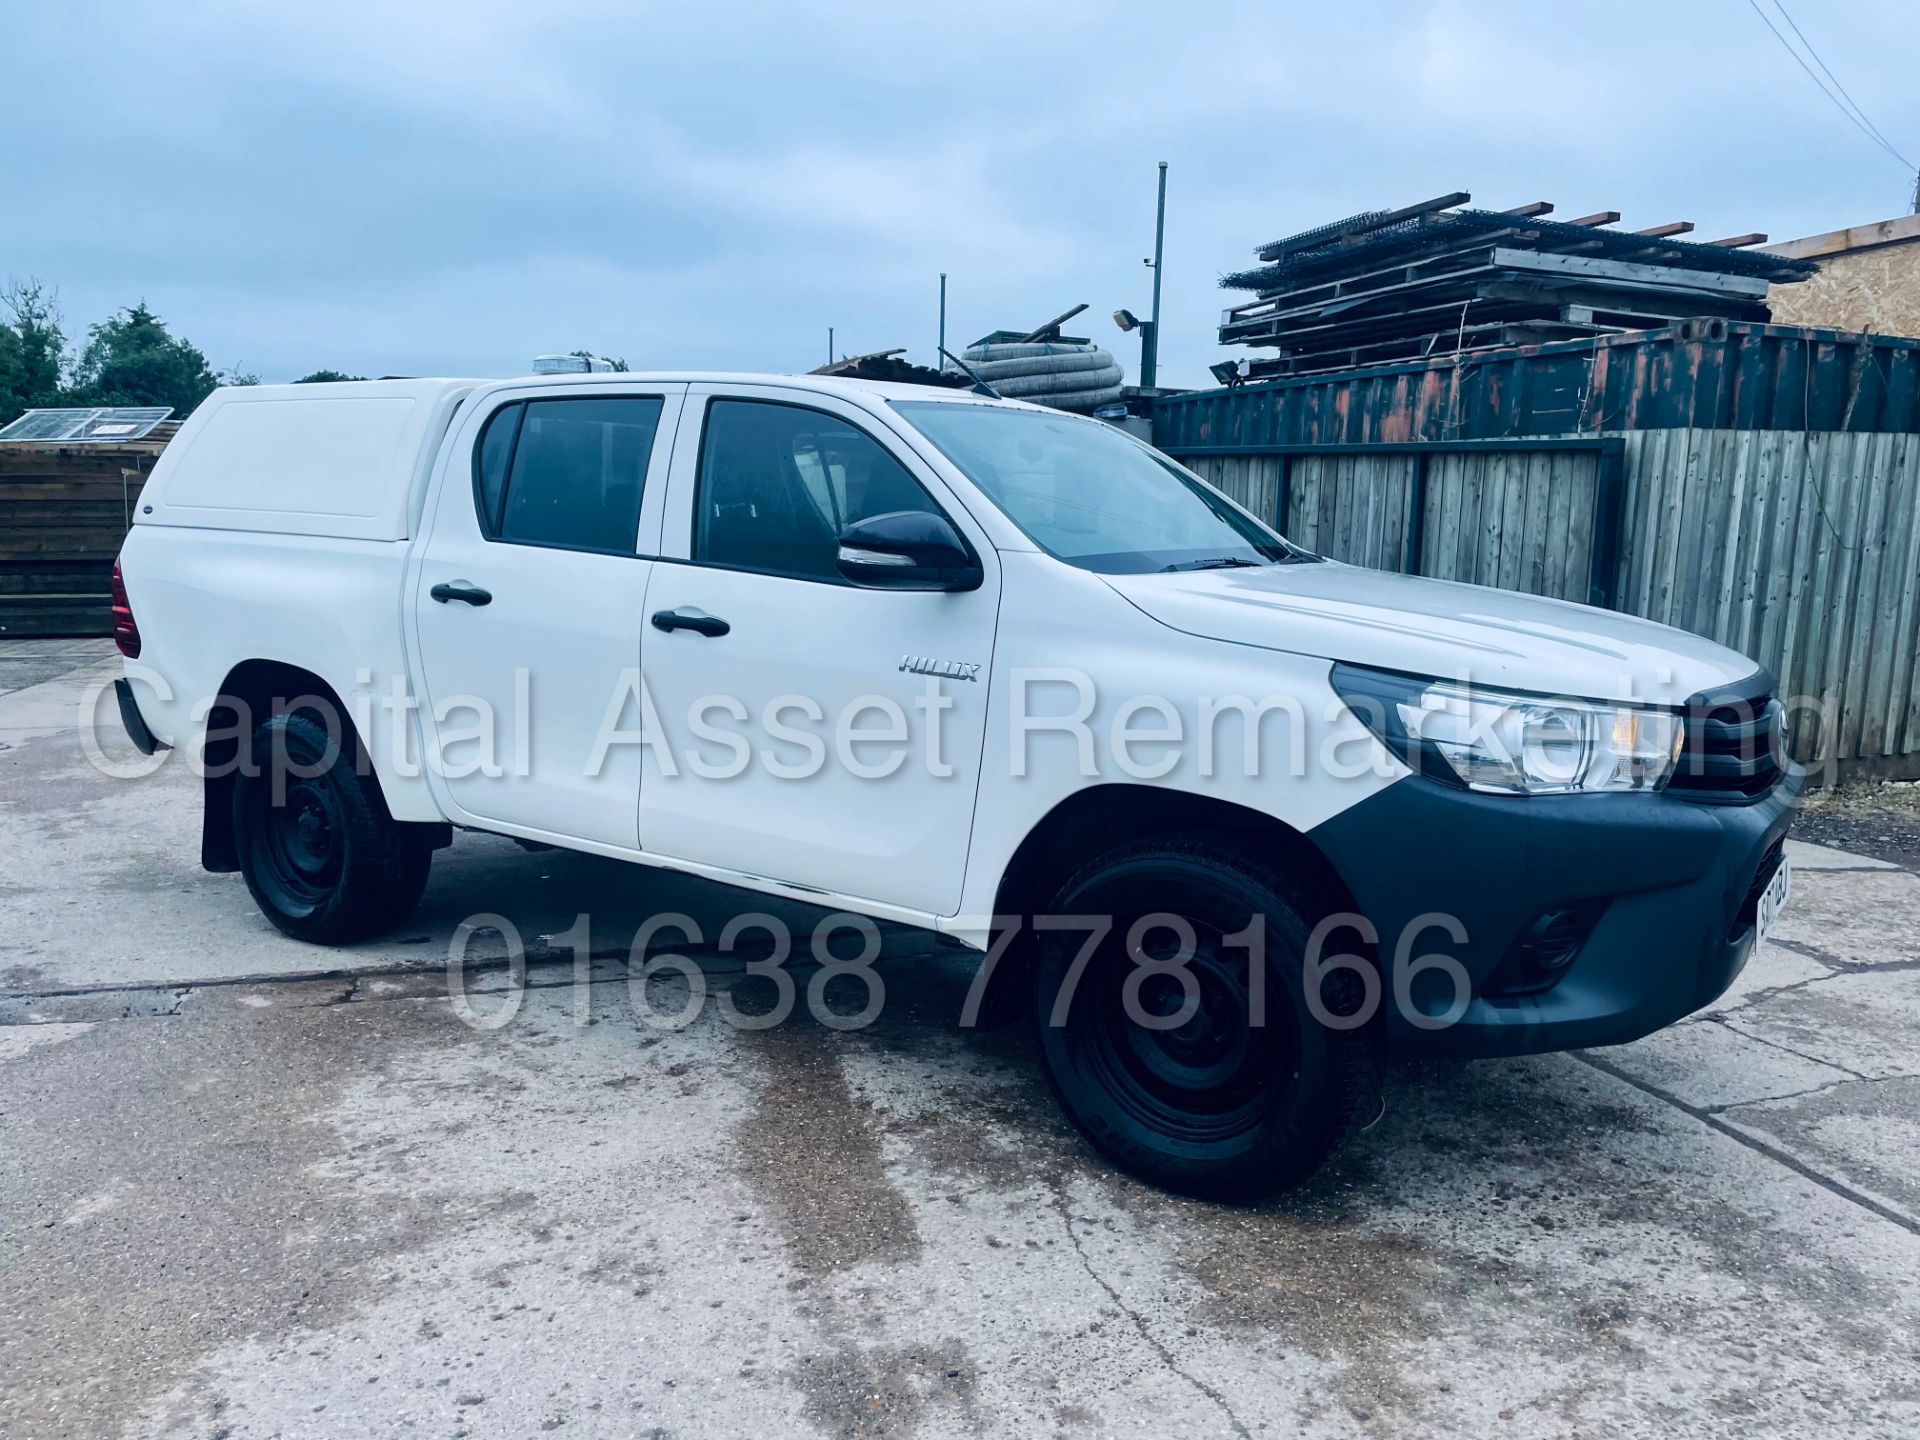 TOYOTA HILUX *ACTIVE EDTION* (2017 - NEW MODEL) '2.4 D-4D - 150 BHP' (1 OWNER FROM NEW) *U-LEZ*